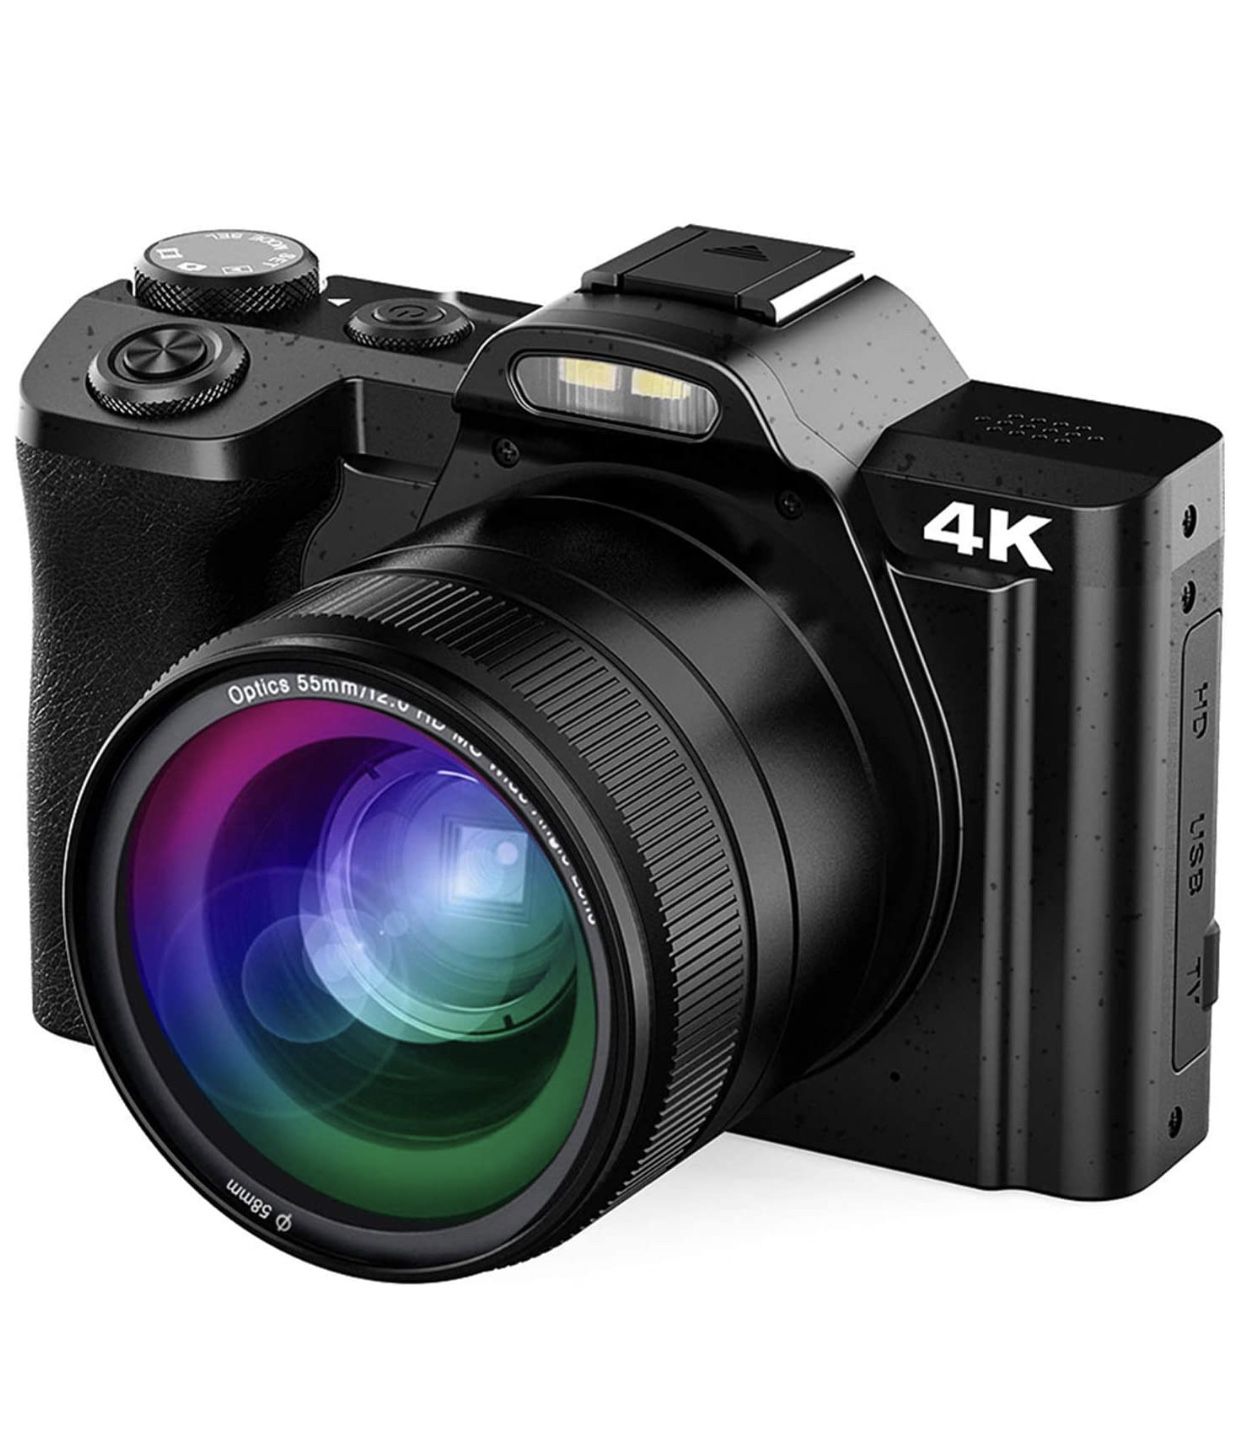 4K Digital Video Camera 48mp with 16x Digital Zoom, 3.5 Inch WiFi YouTube Camera, IPS Touch Screen